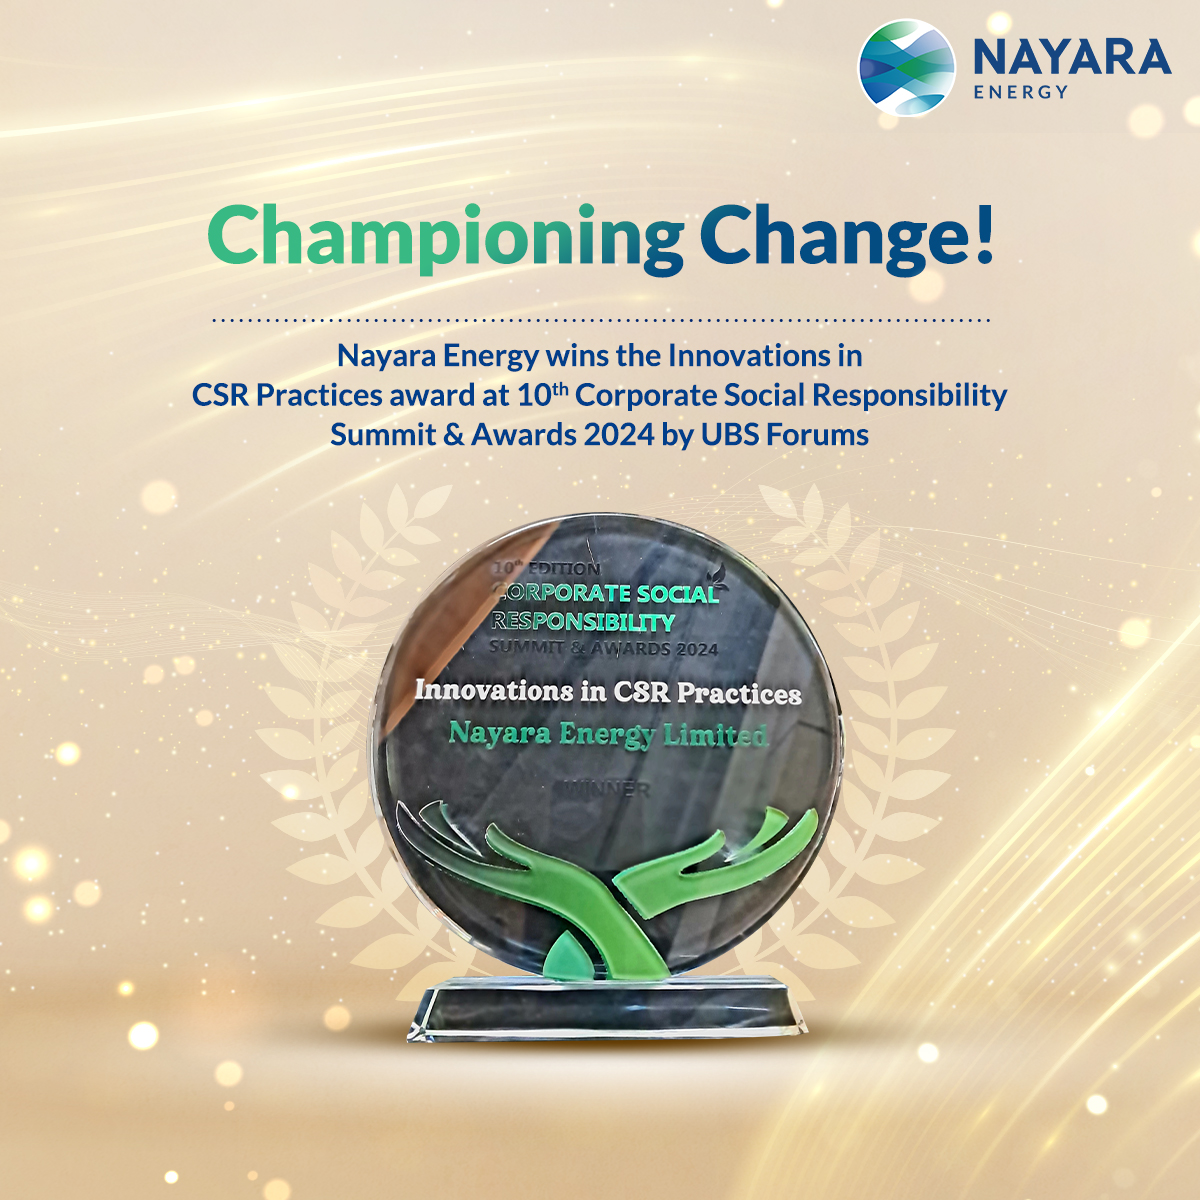 We are delighted to announce that we have been recognised for Innovations in CSR Practices at the 10th Corporate Social Responsibility Summit & Awards 2024 by UBS Forums. This award is a testament to our unwavering commitment to creating meaningful impact through our CSR…